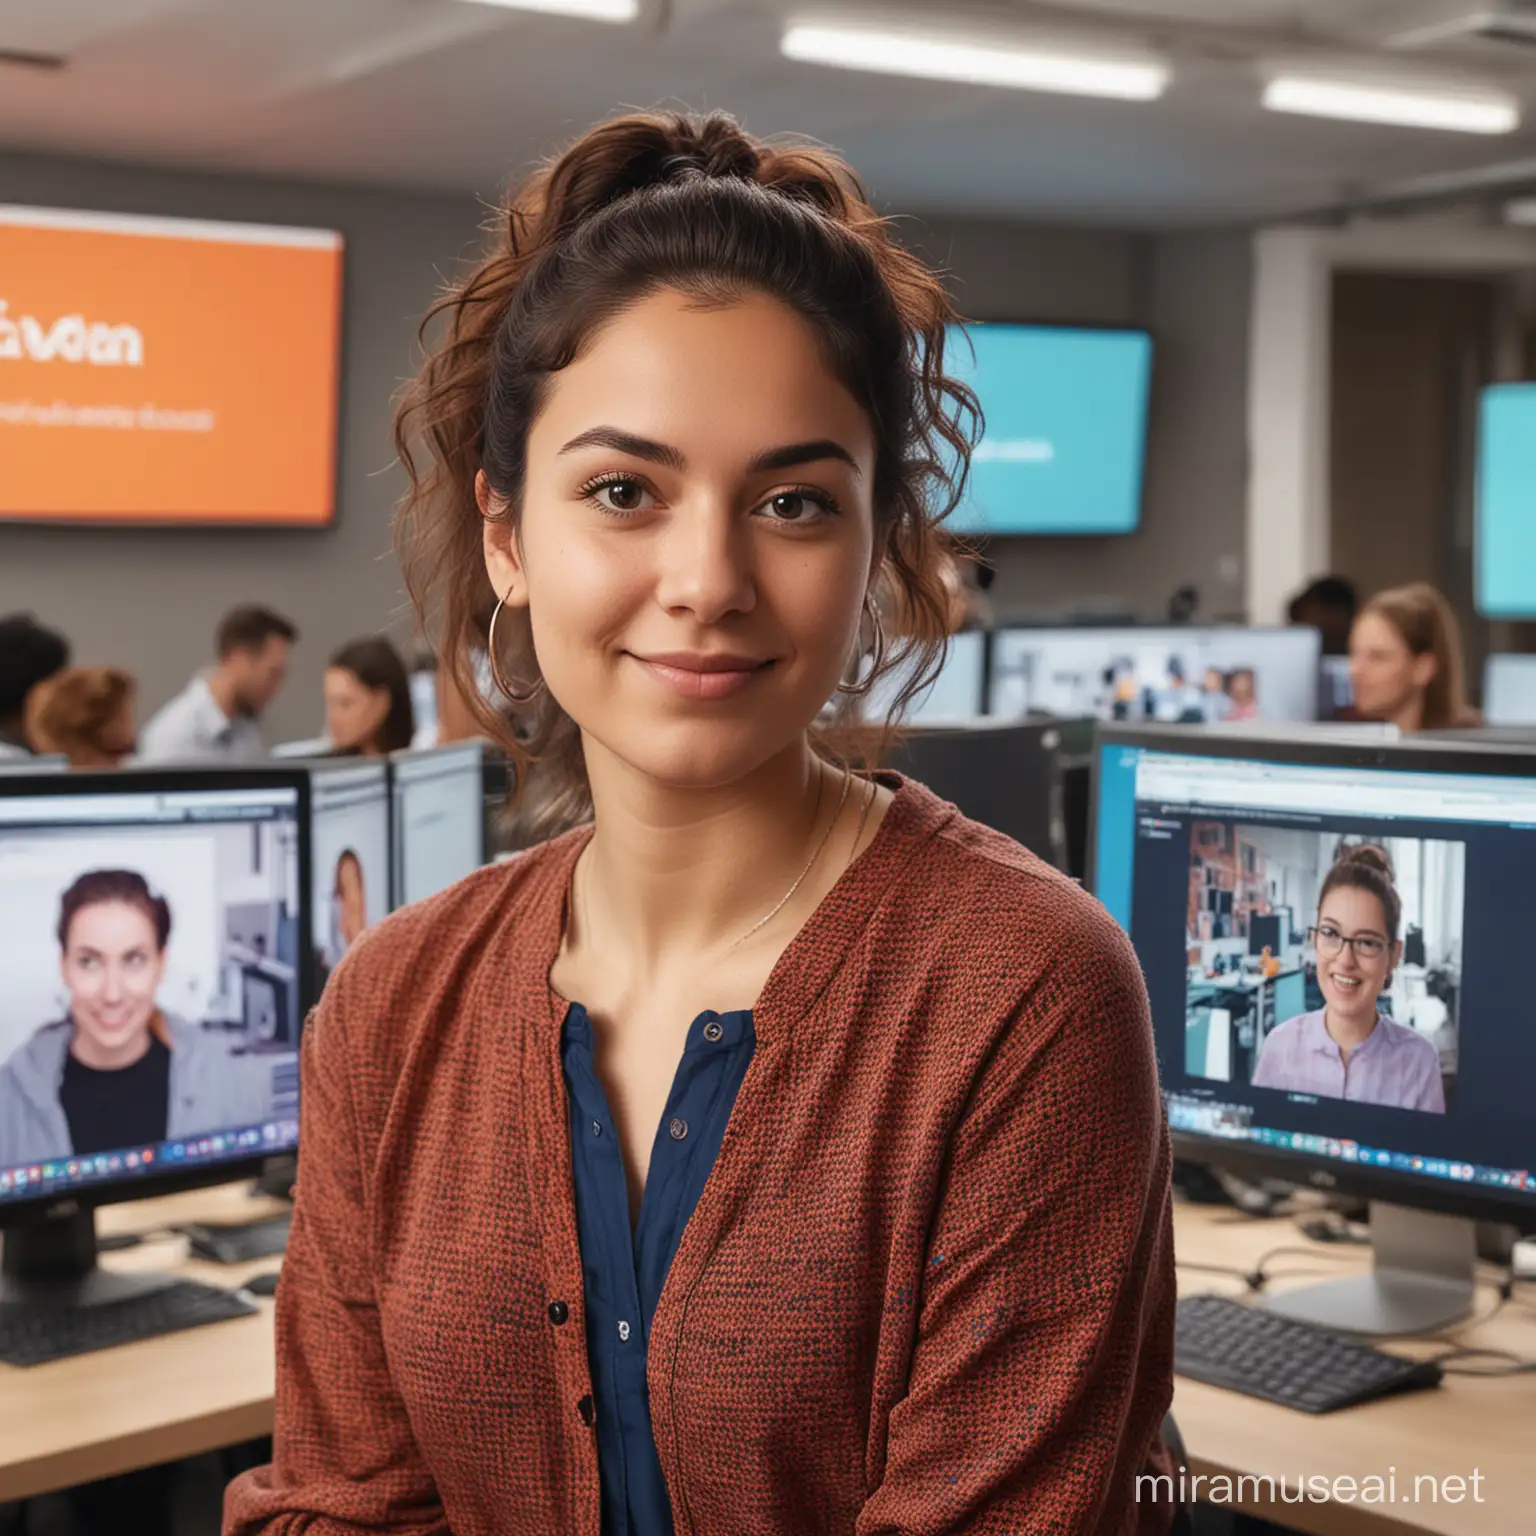 Design an image of Maya, a software developer at Lydia, in a vibrant workspace. Show her passion for innovation with digital screens and a diverse team in the background. This image is for the 'Faces of Lydia' campaign, highlighting employee diversity and creativity.